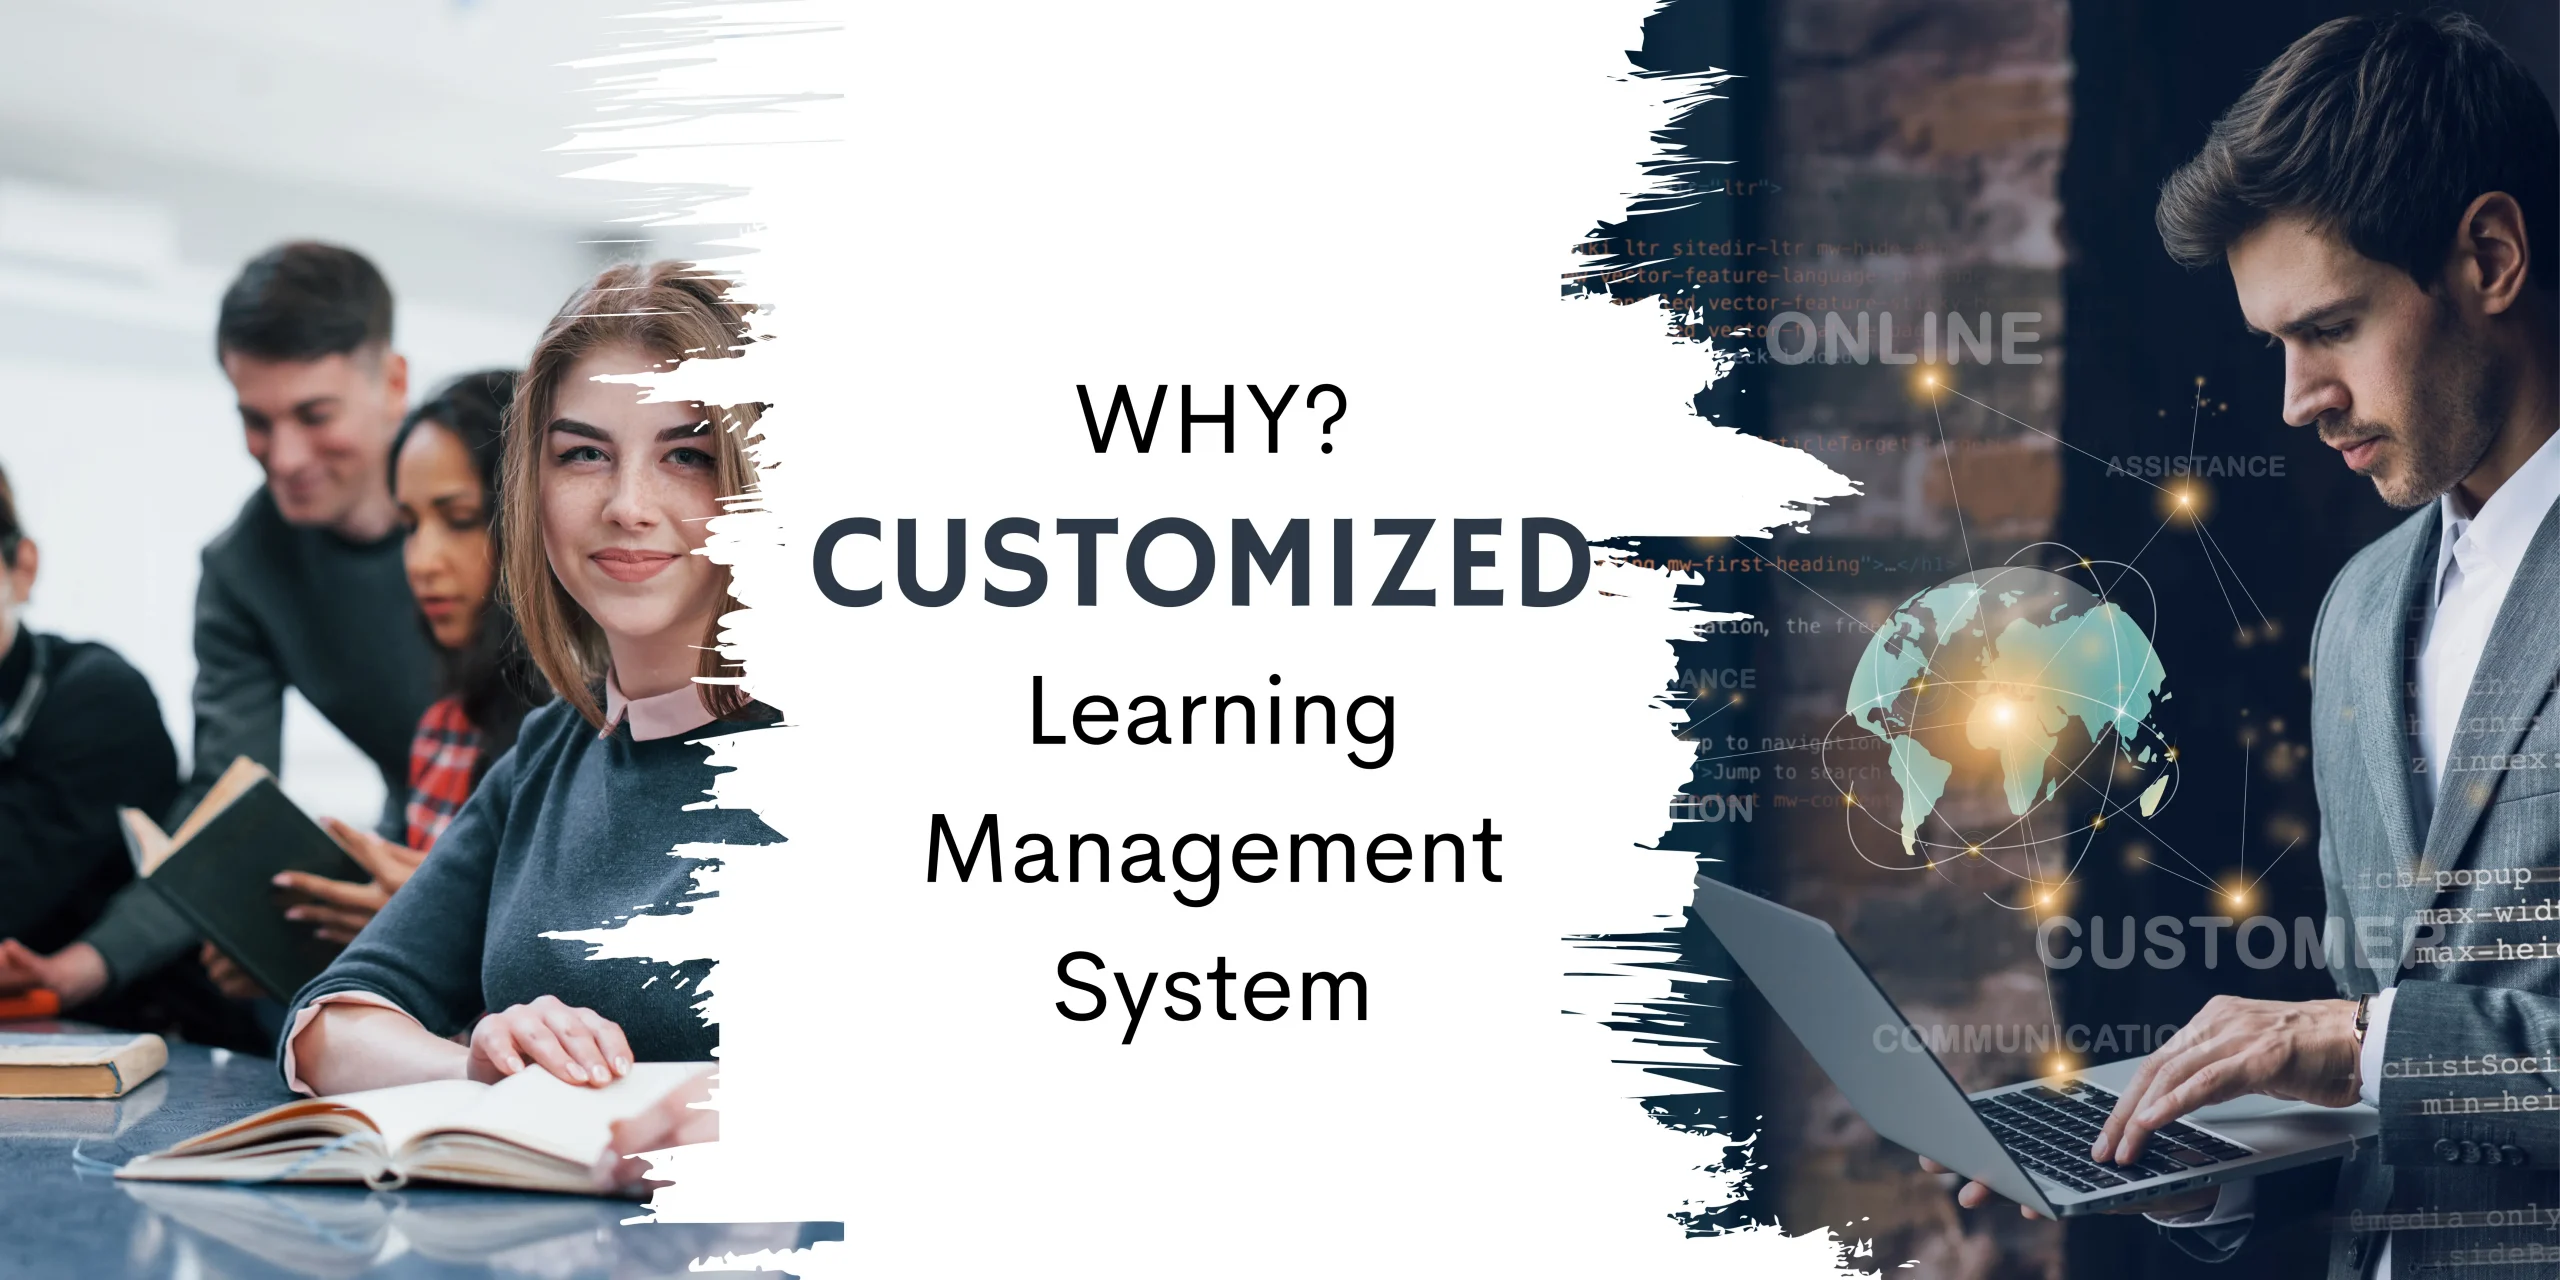 Customized Learning Management Systems